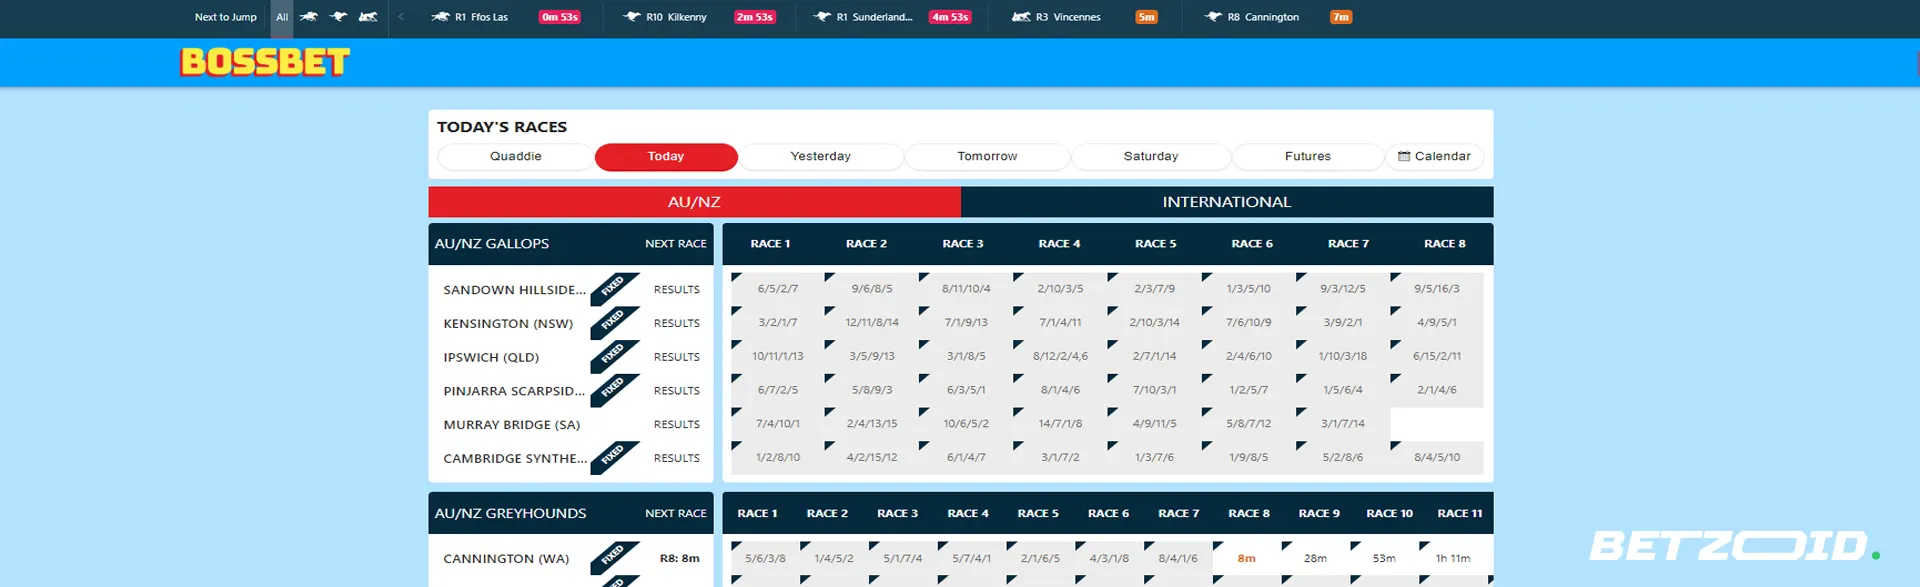 Bossbet odds page displaying races and betting options.